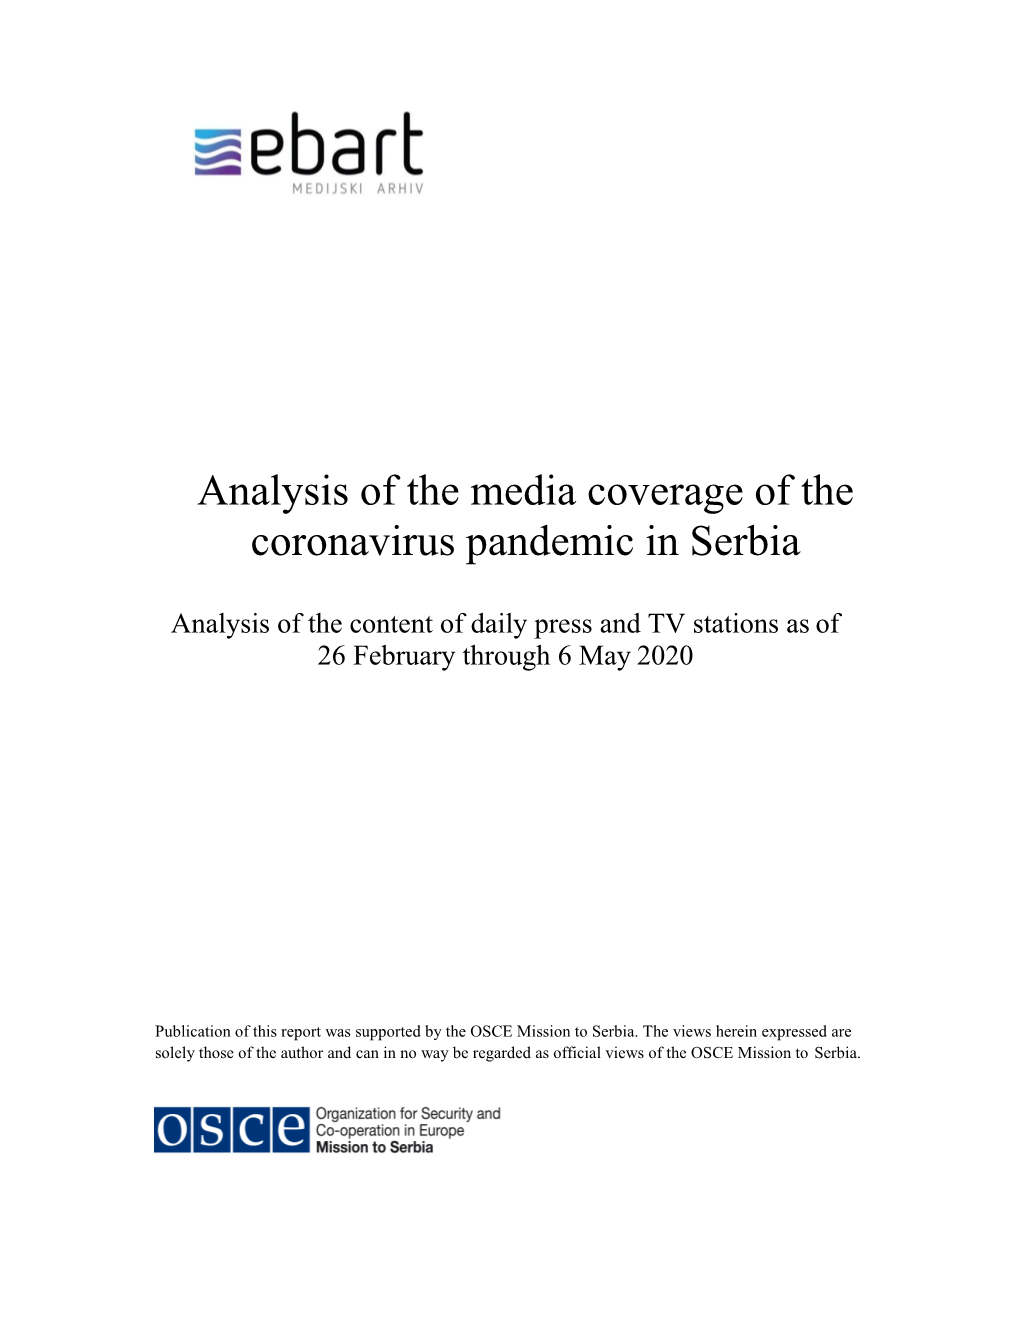 Analysis of the Media Coverage of the Coronavirus Pandemic in Serbia